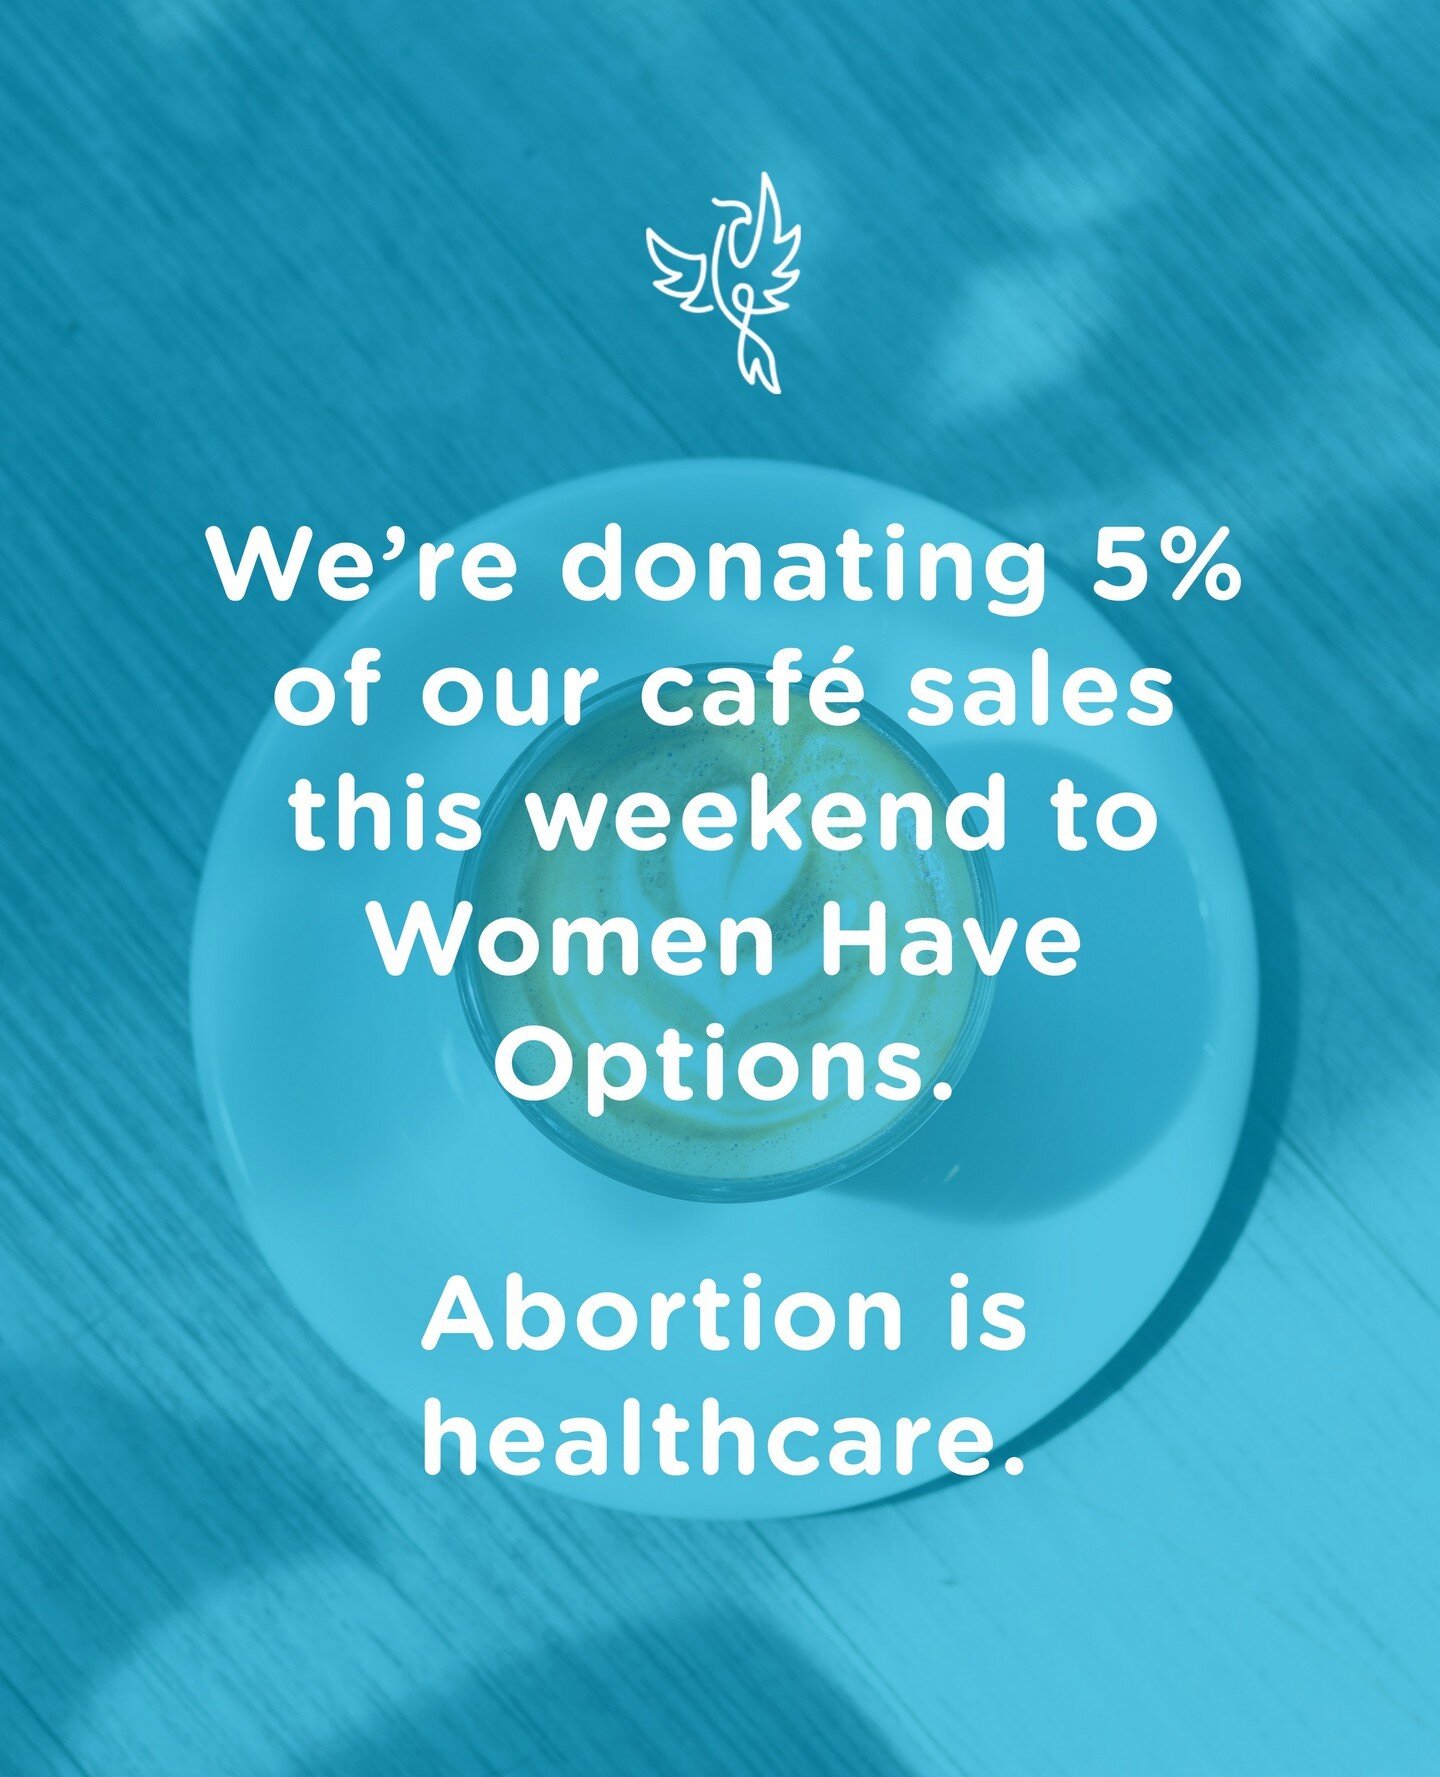 We're devastated and disappointed by the news that the Supreme Court has overturned Roe v. Wade.⁠
⁠
You can expect that Phoenix will continue to fight as we have for decades: running voter drives out of our caf&eacute;s, driving conversation when we 